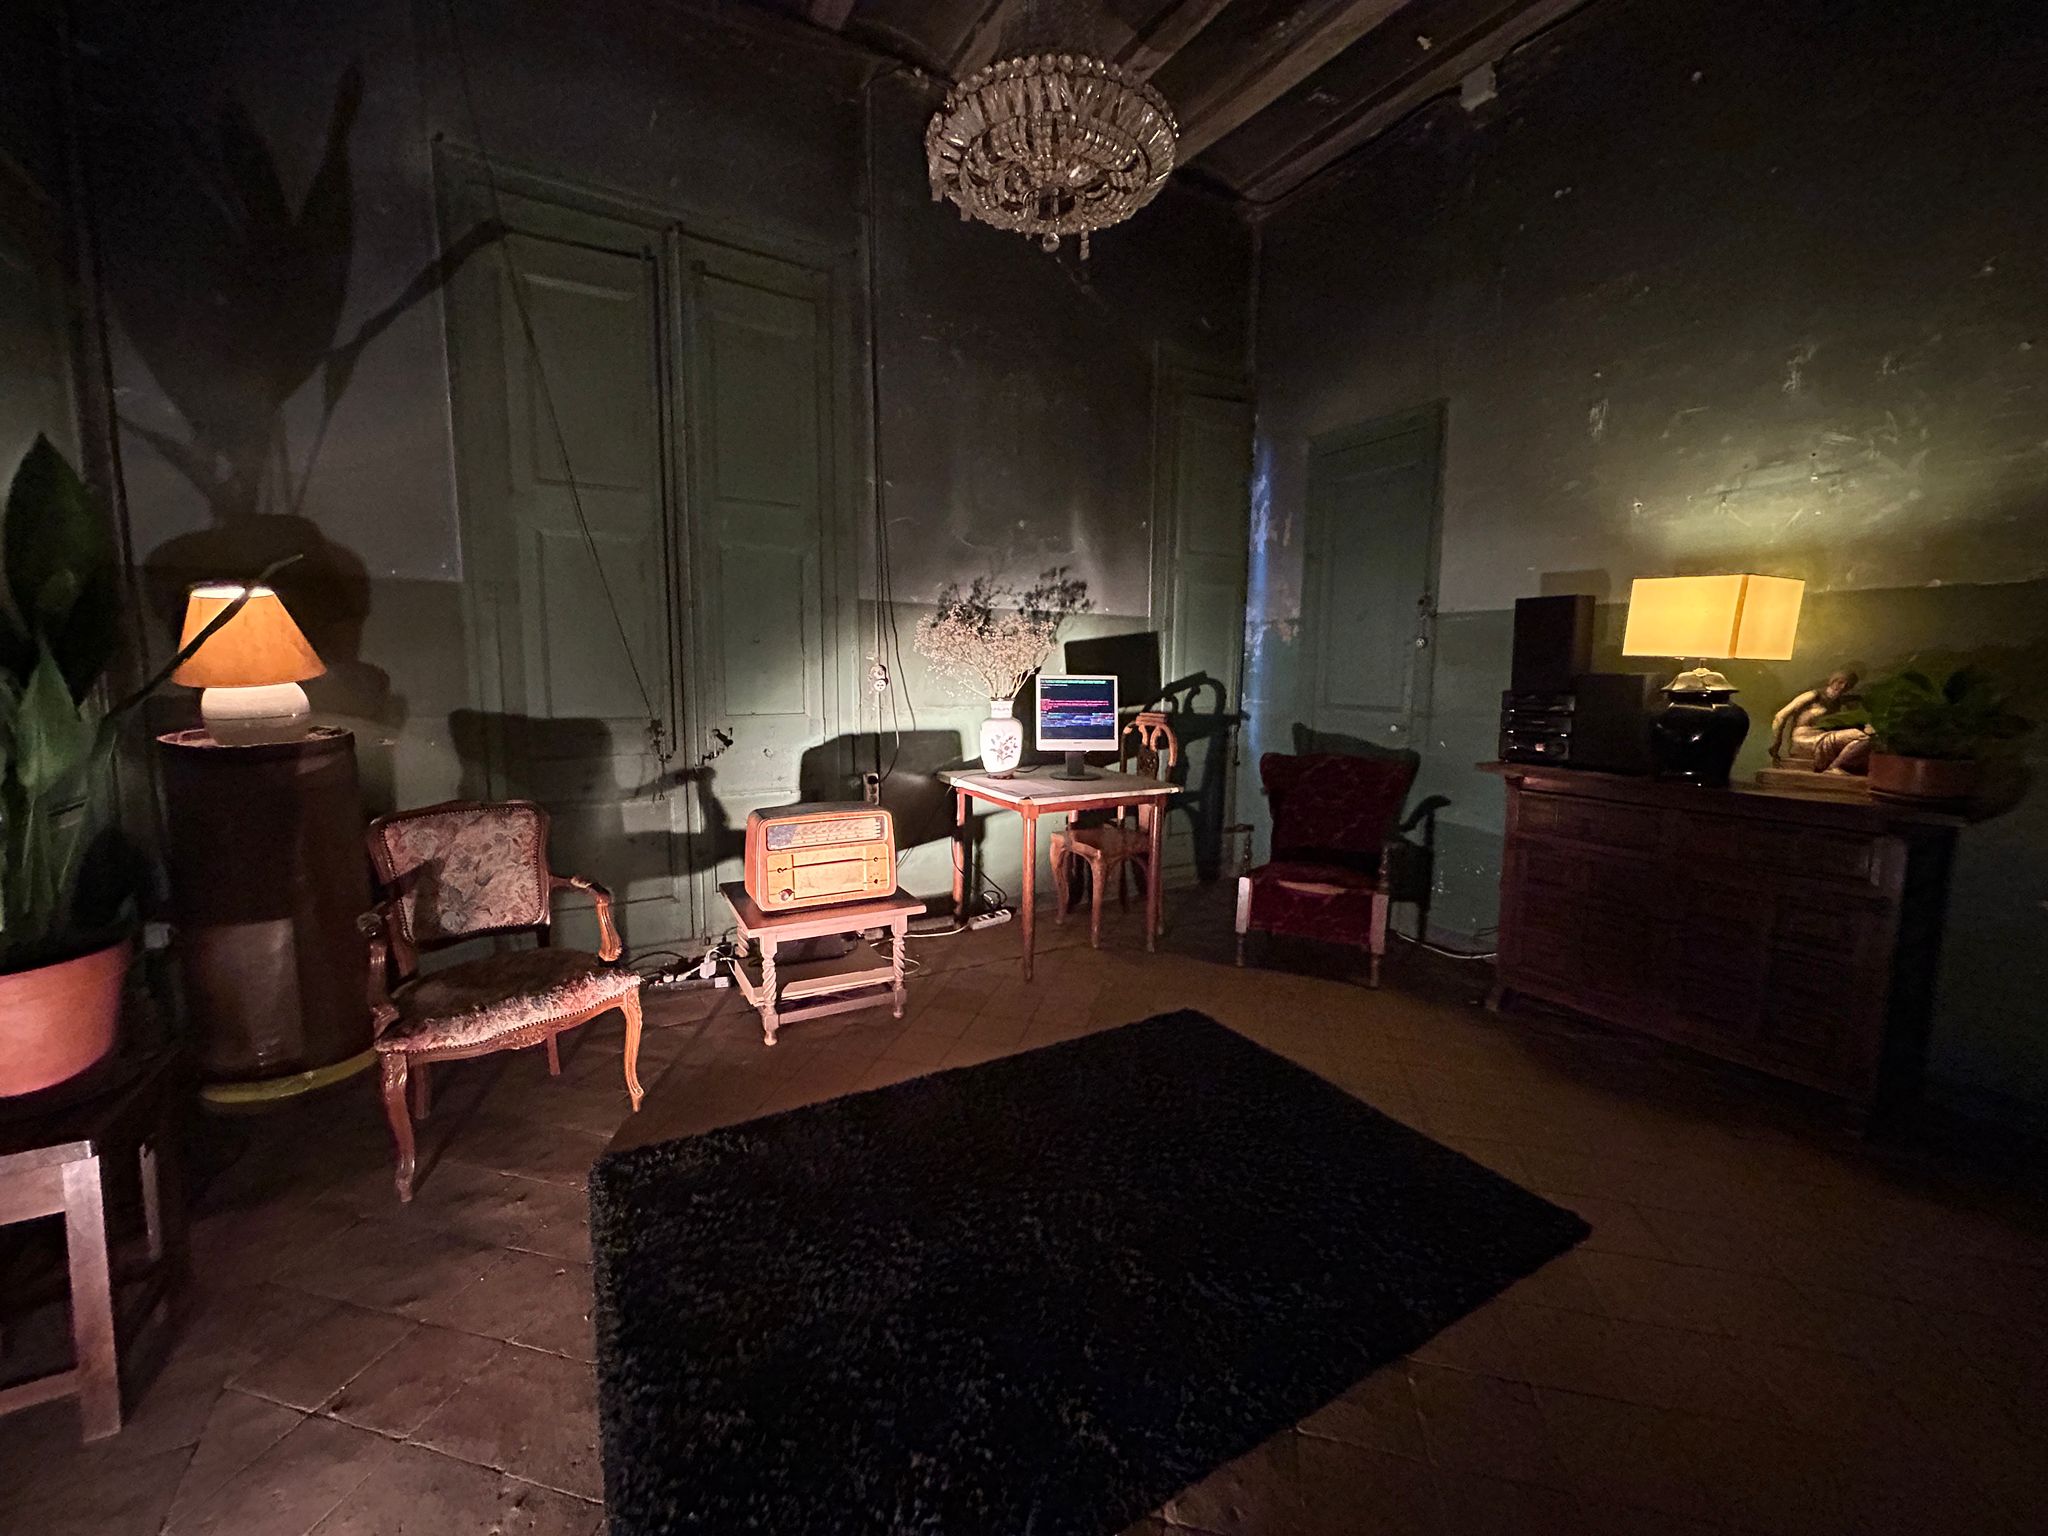 Photograph of the installation, a room full of old furniture including 2 old radios and a screen showing text